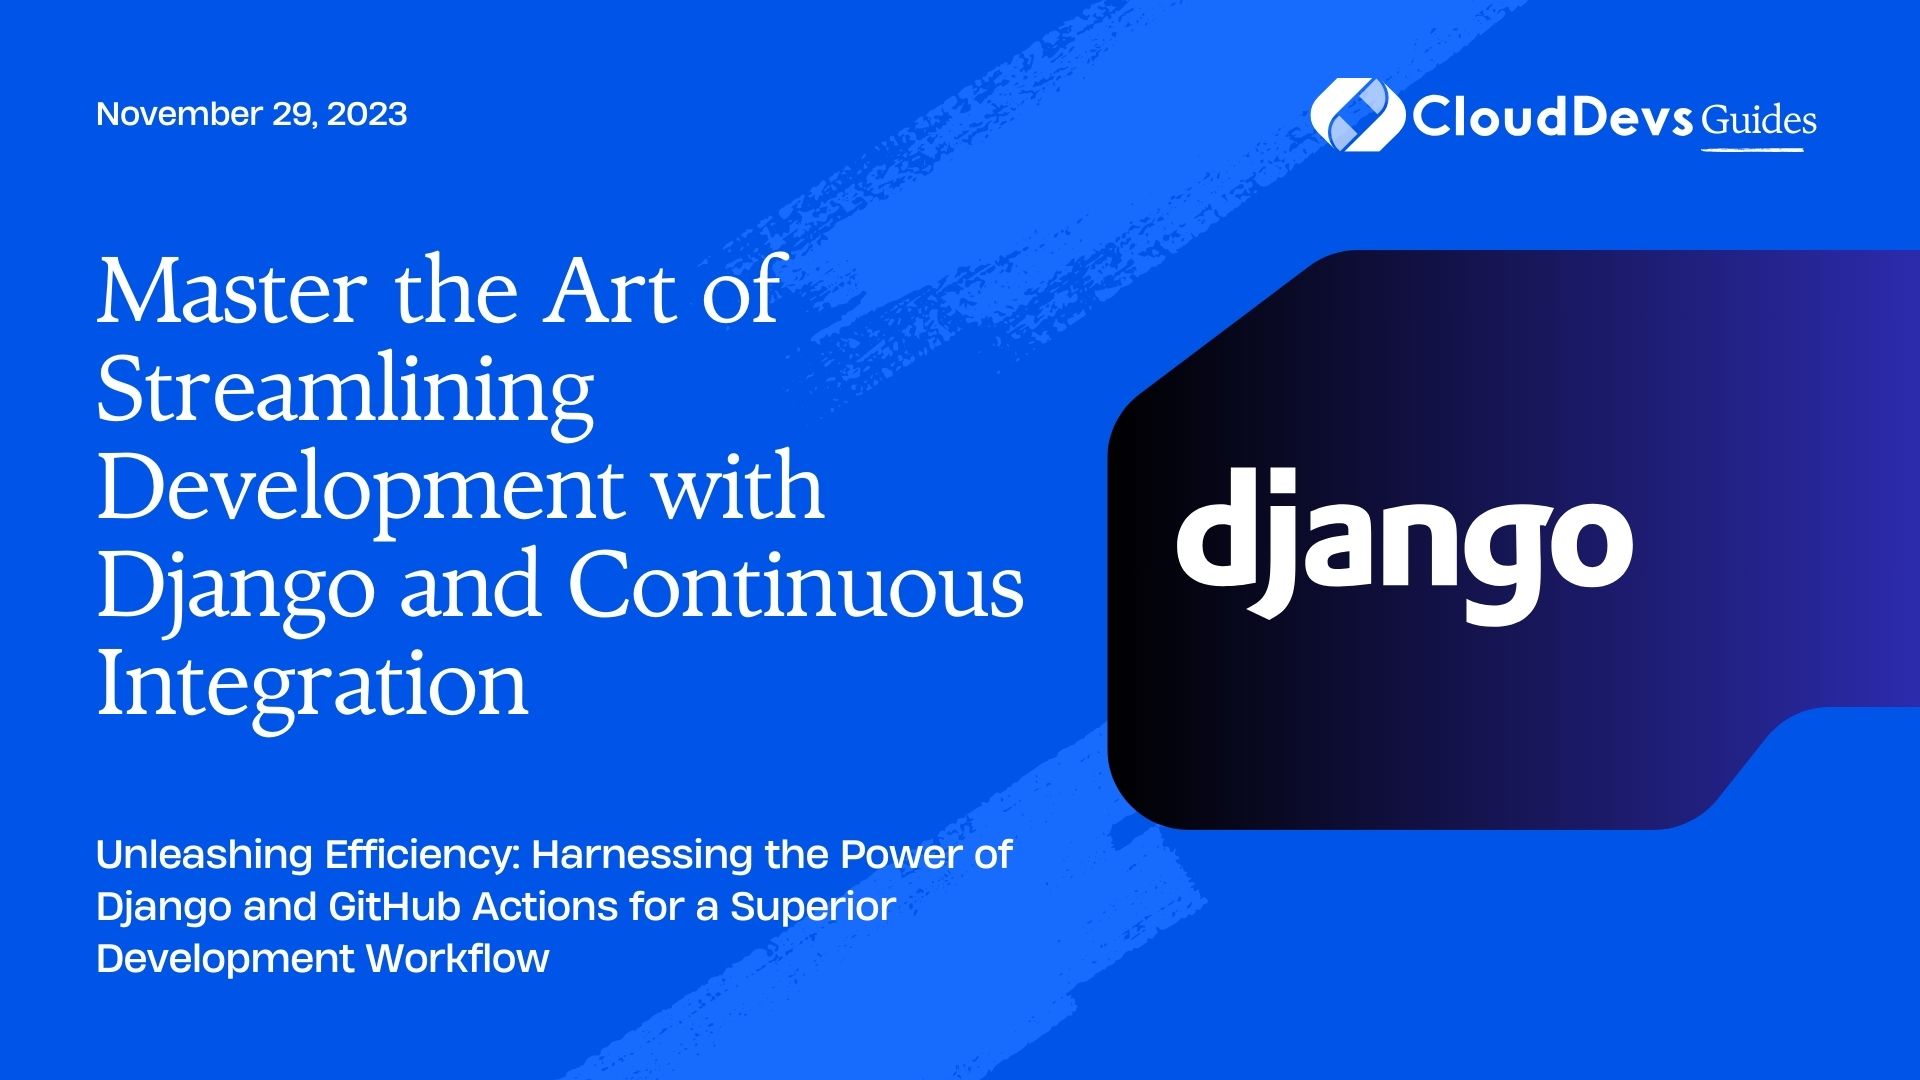 Master the Art of Streamlining Development with Django and Continuous Integration